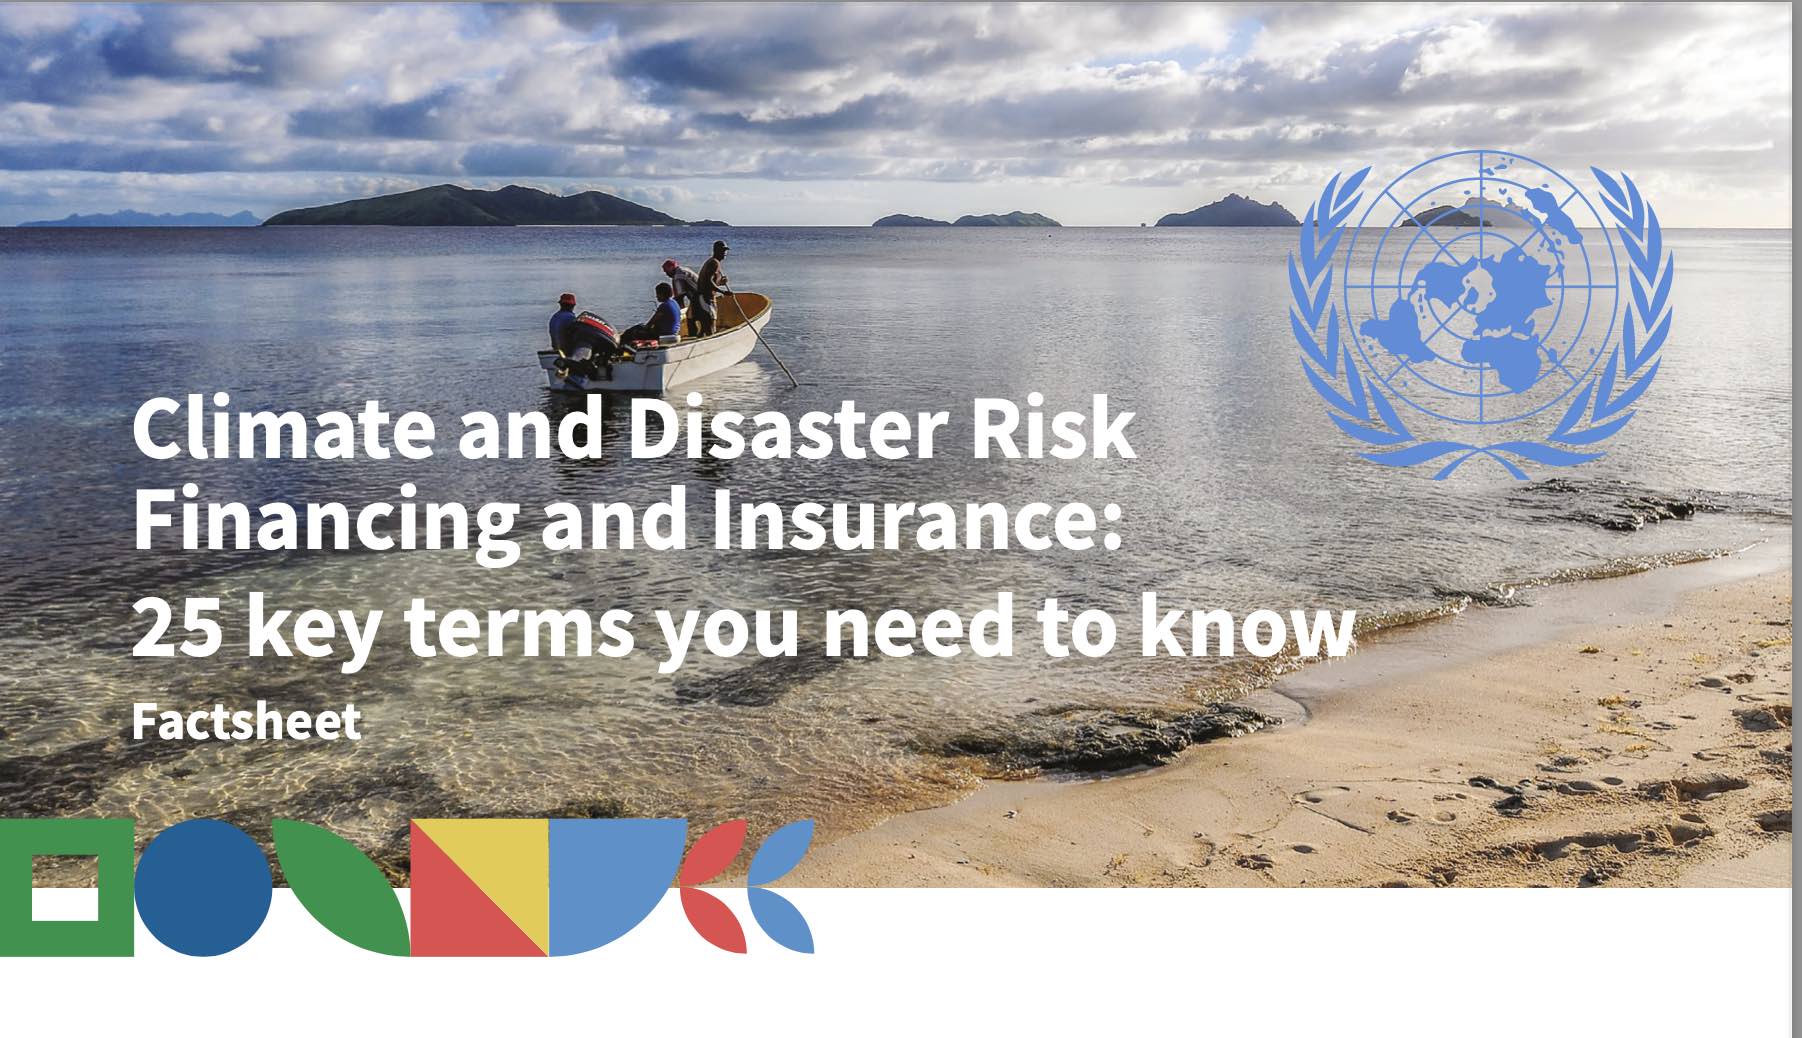 Factsheet - Climate and Disaster Risk Financing and Insurance: 25 key terms you need to know